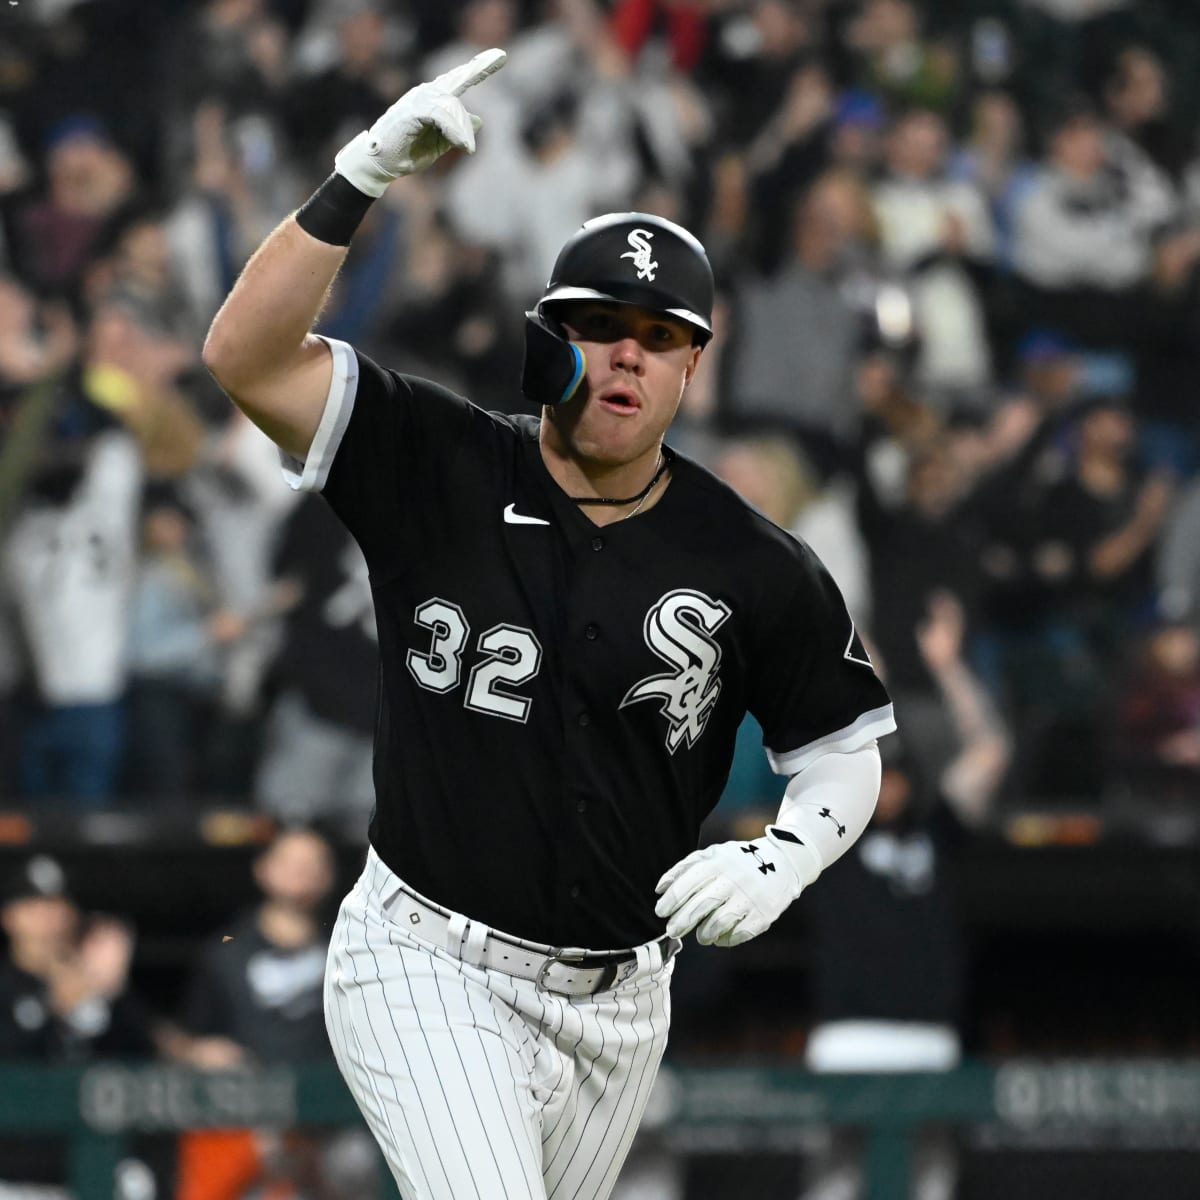 Robert homers for 4th straight game, White Sox beat Guardians 8-3